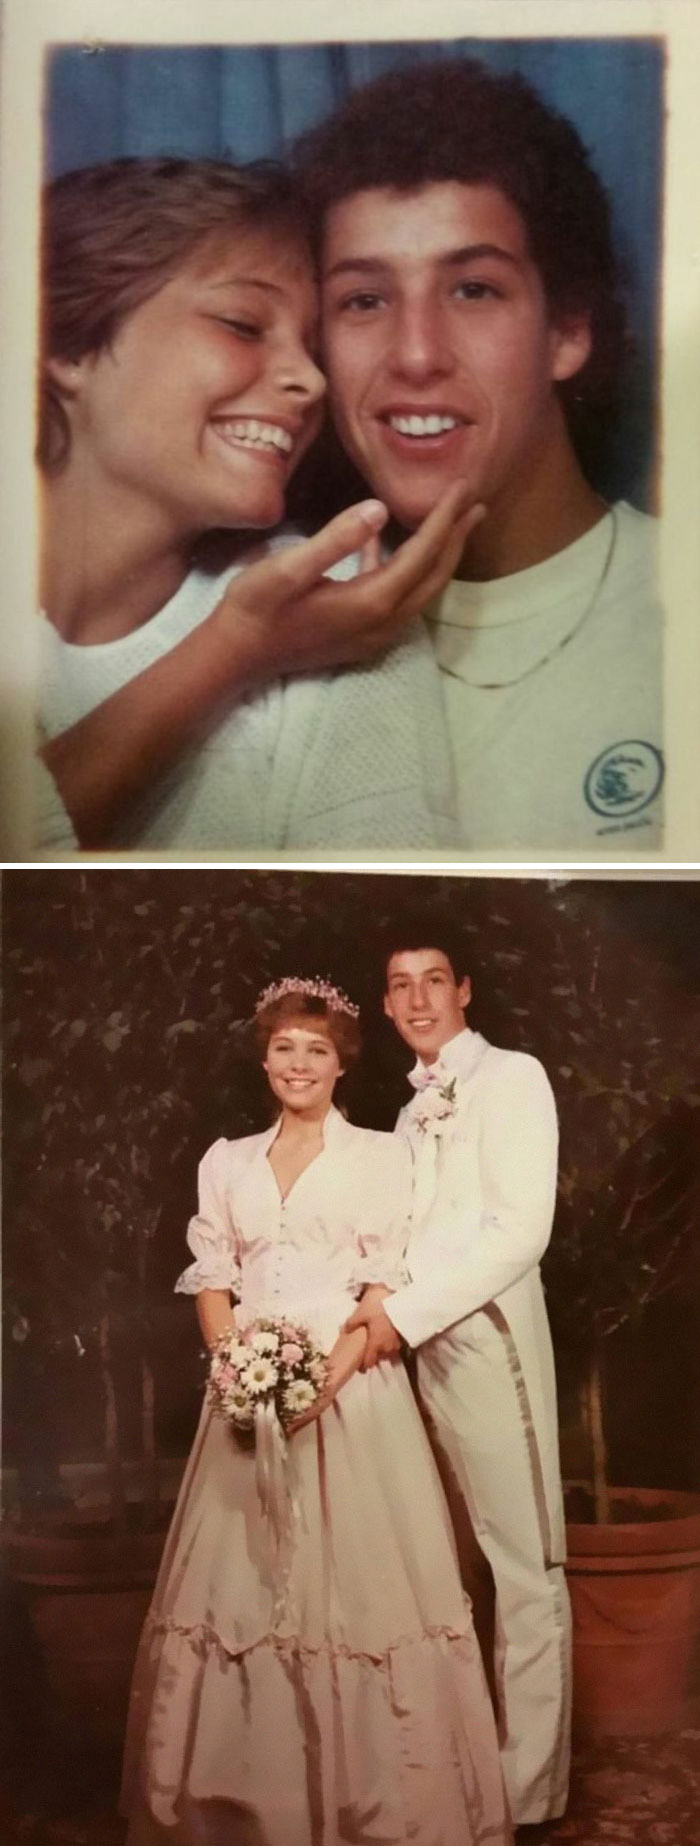 My Mom Dated Adam Sandler In High School. Here Are Her Prom Pics